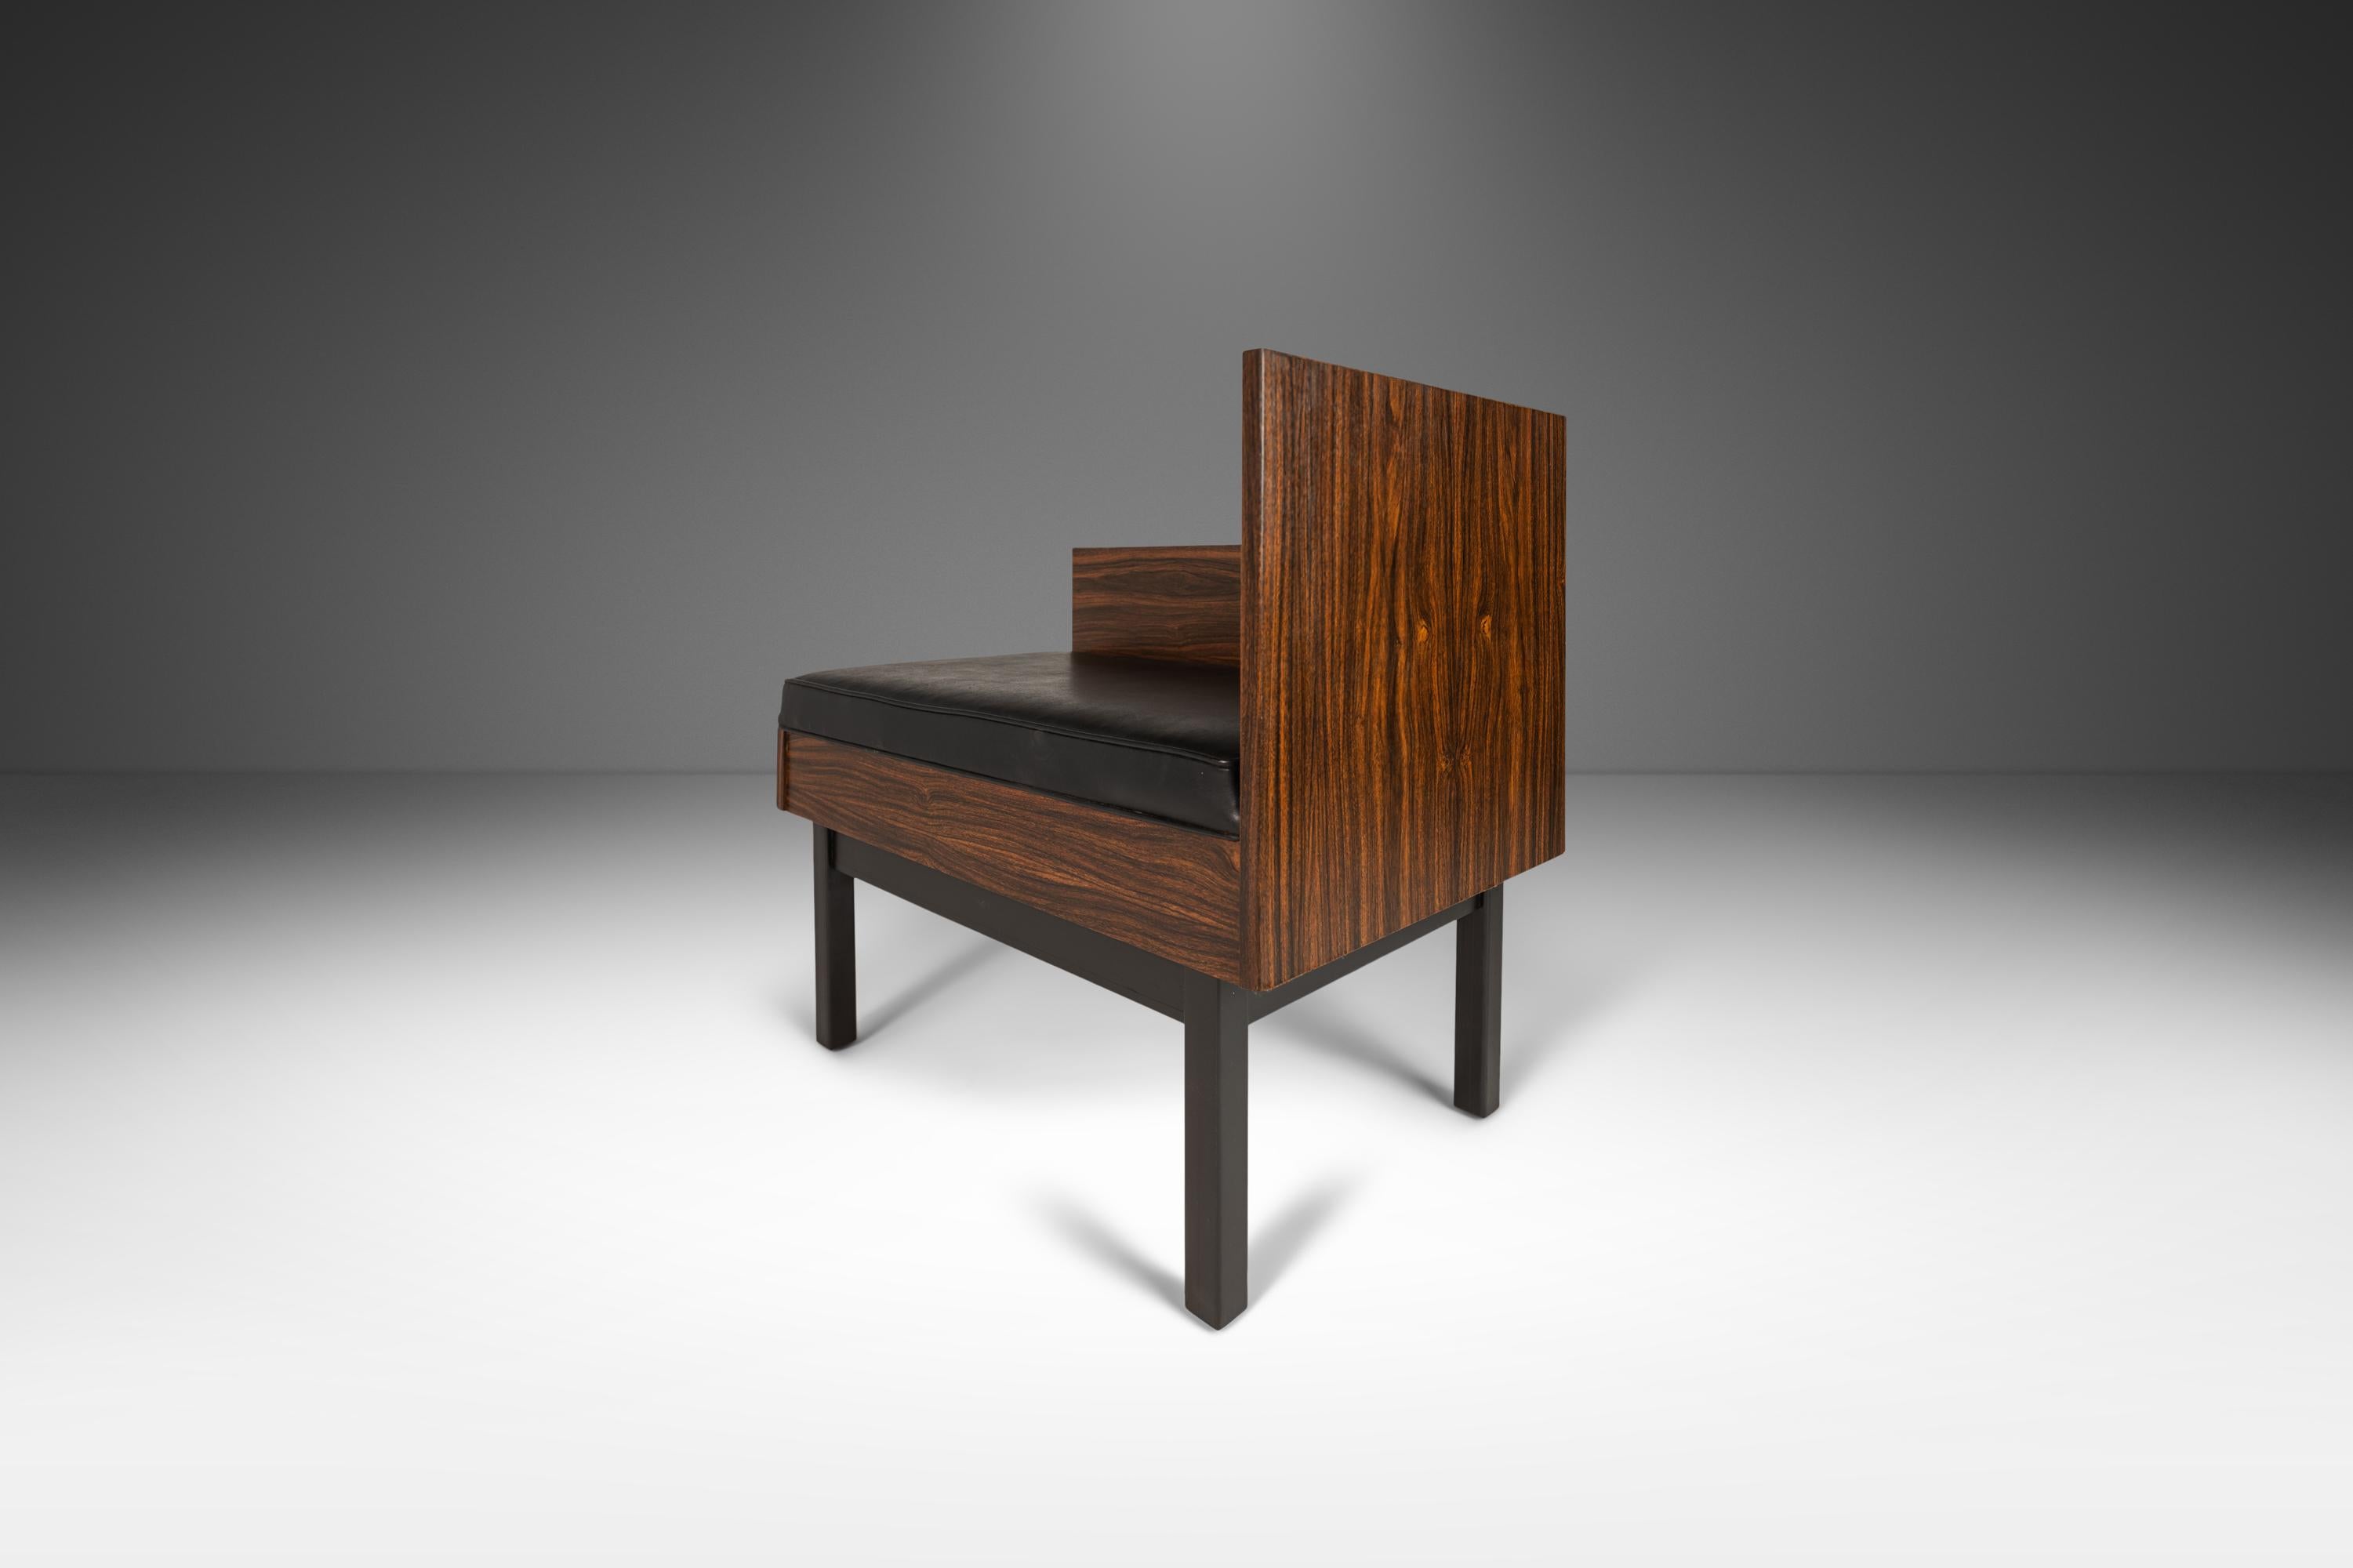 Set of Two ( 2 ) Modular Benches Kissing Benches in Rosewood Laminate, c. 1950's For Sale 1